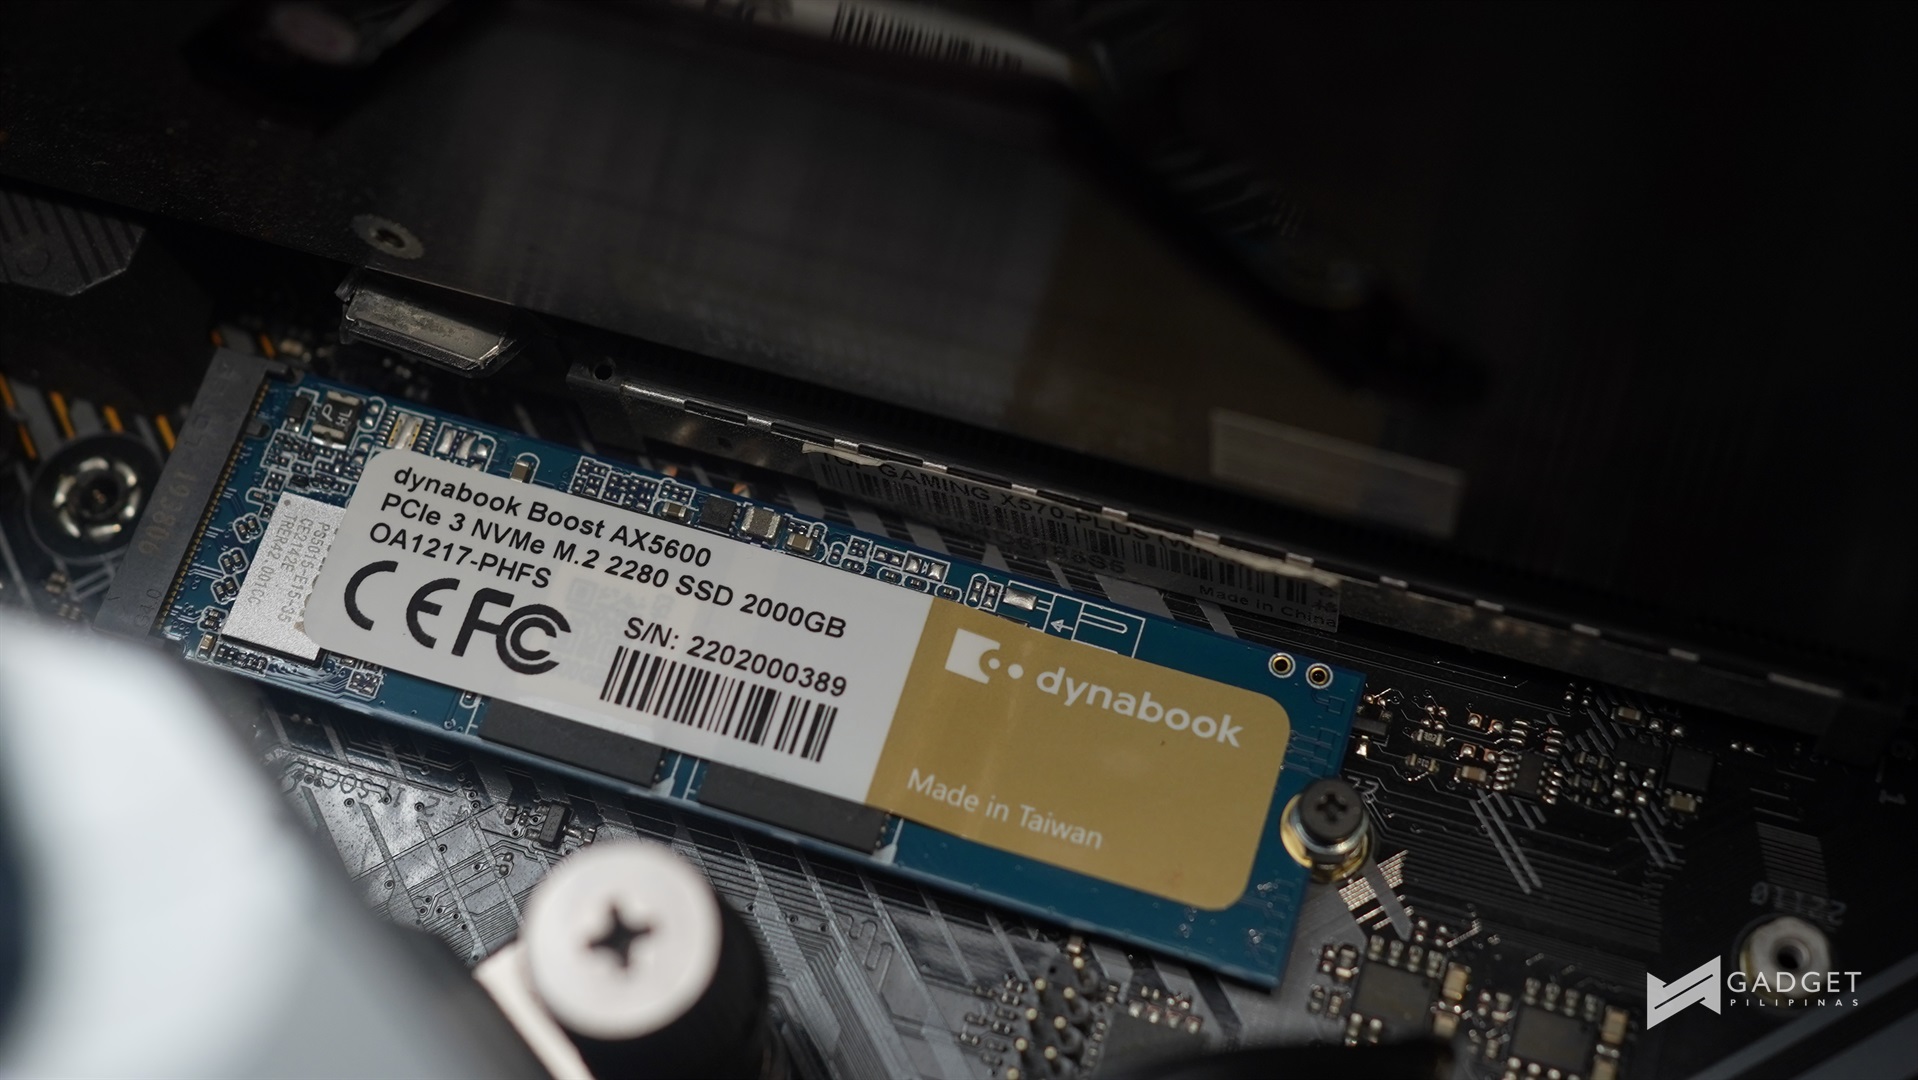 How to Install an M.2 SSD - Kingston Technology